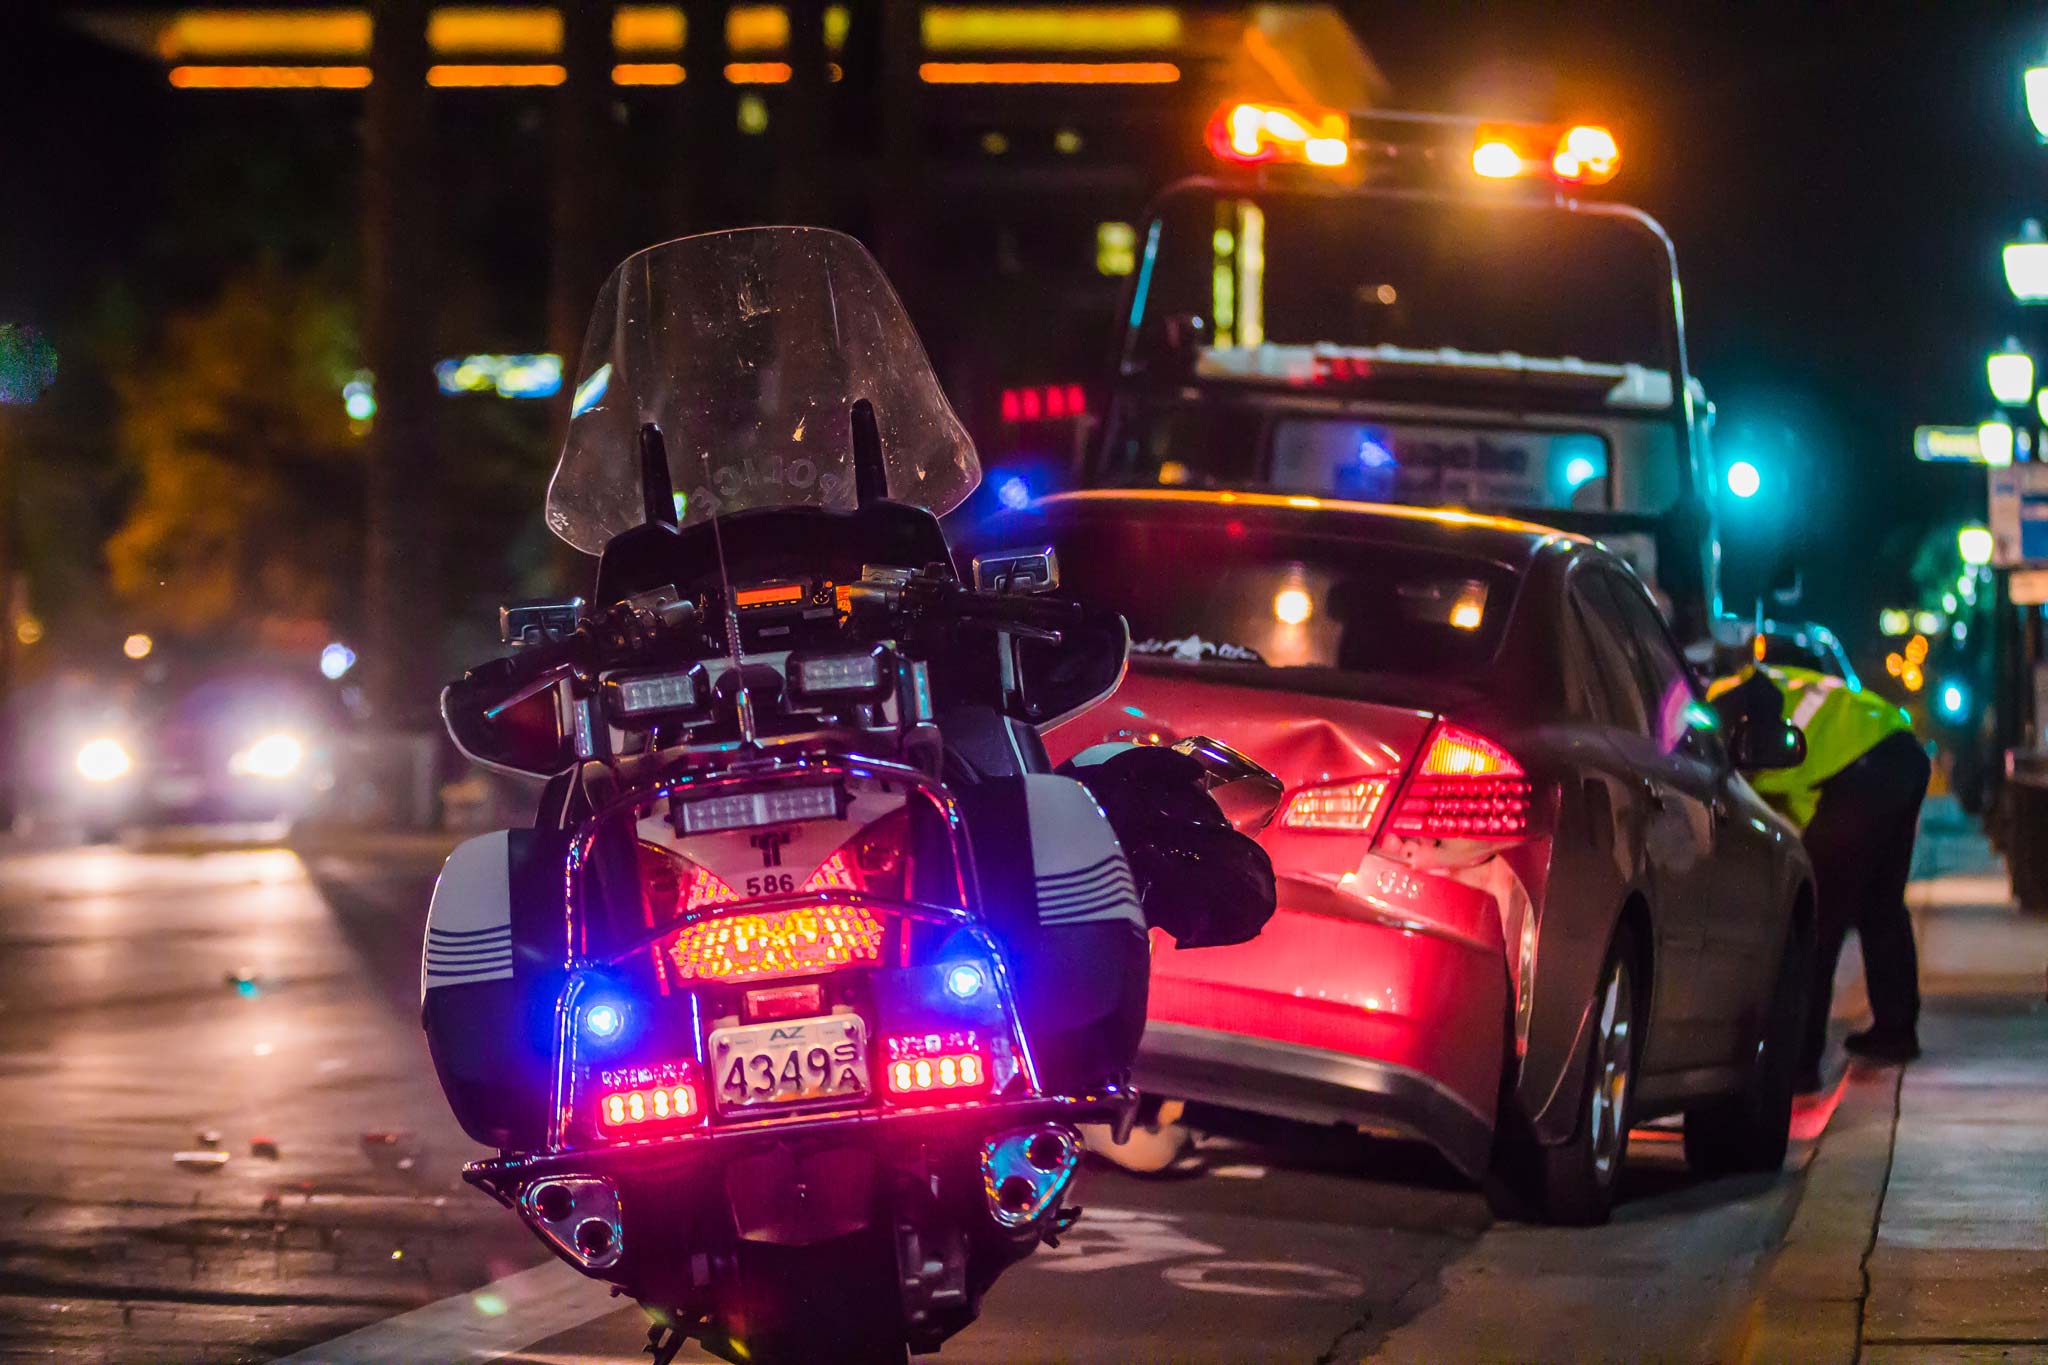 a police motorcycle views from behind at a traffic accident at night.